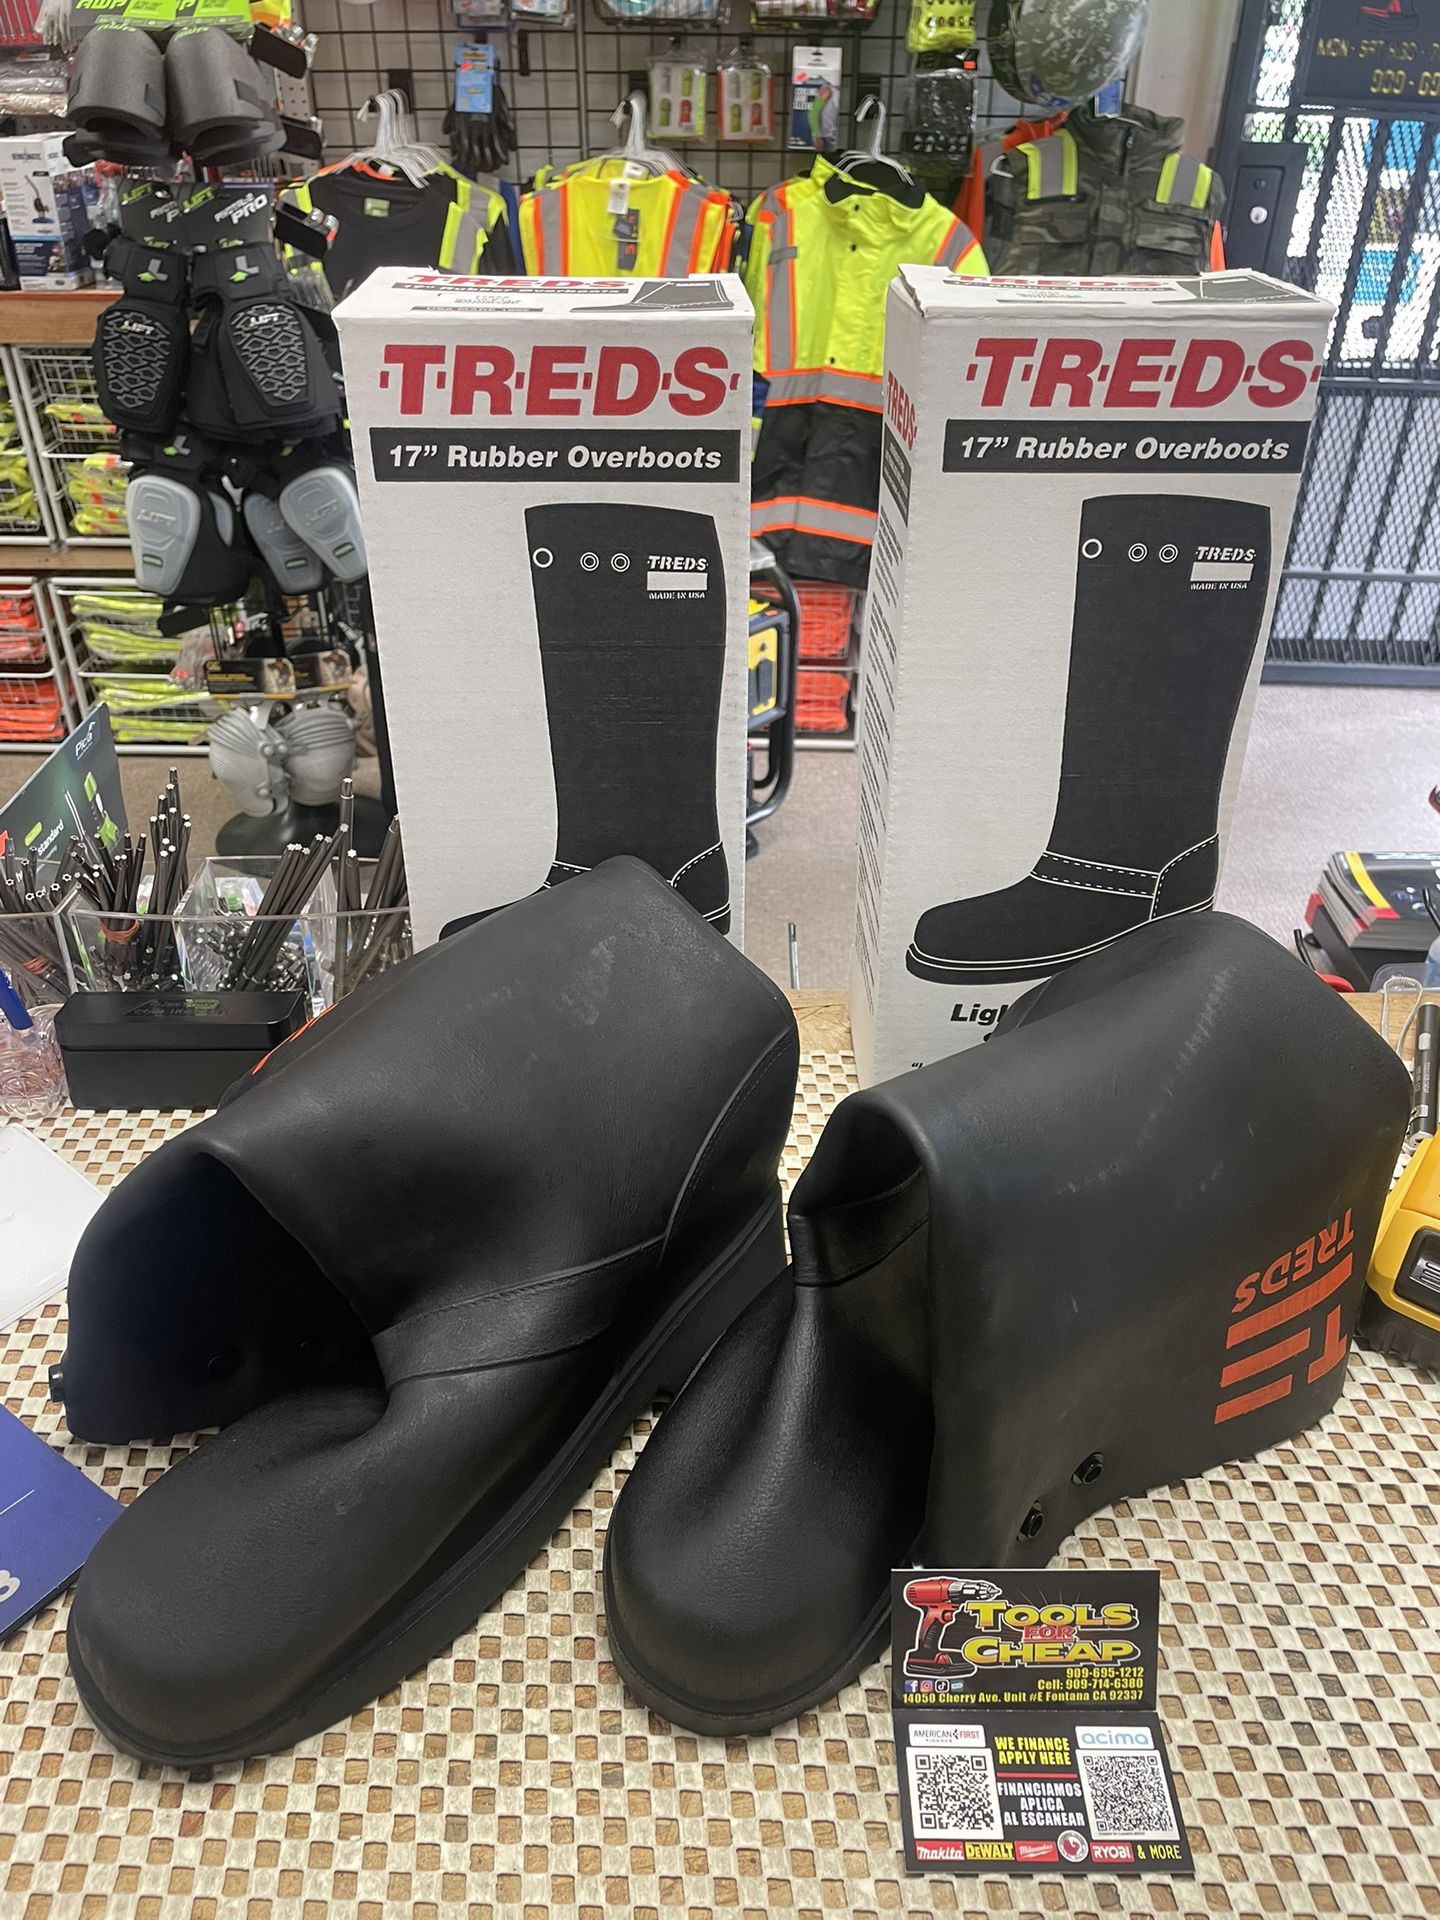 T-R-E-D-S  17” Rubber Overboots For Concrete ( BOOTS ONLY ) $79 EACH.  ( USA MADE )